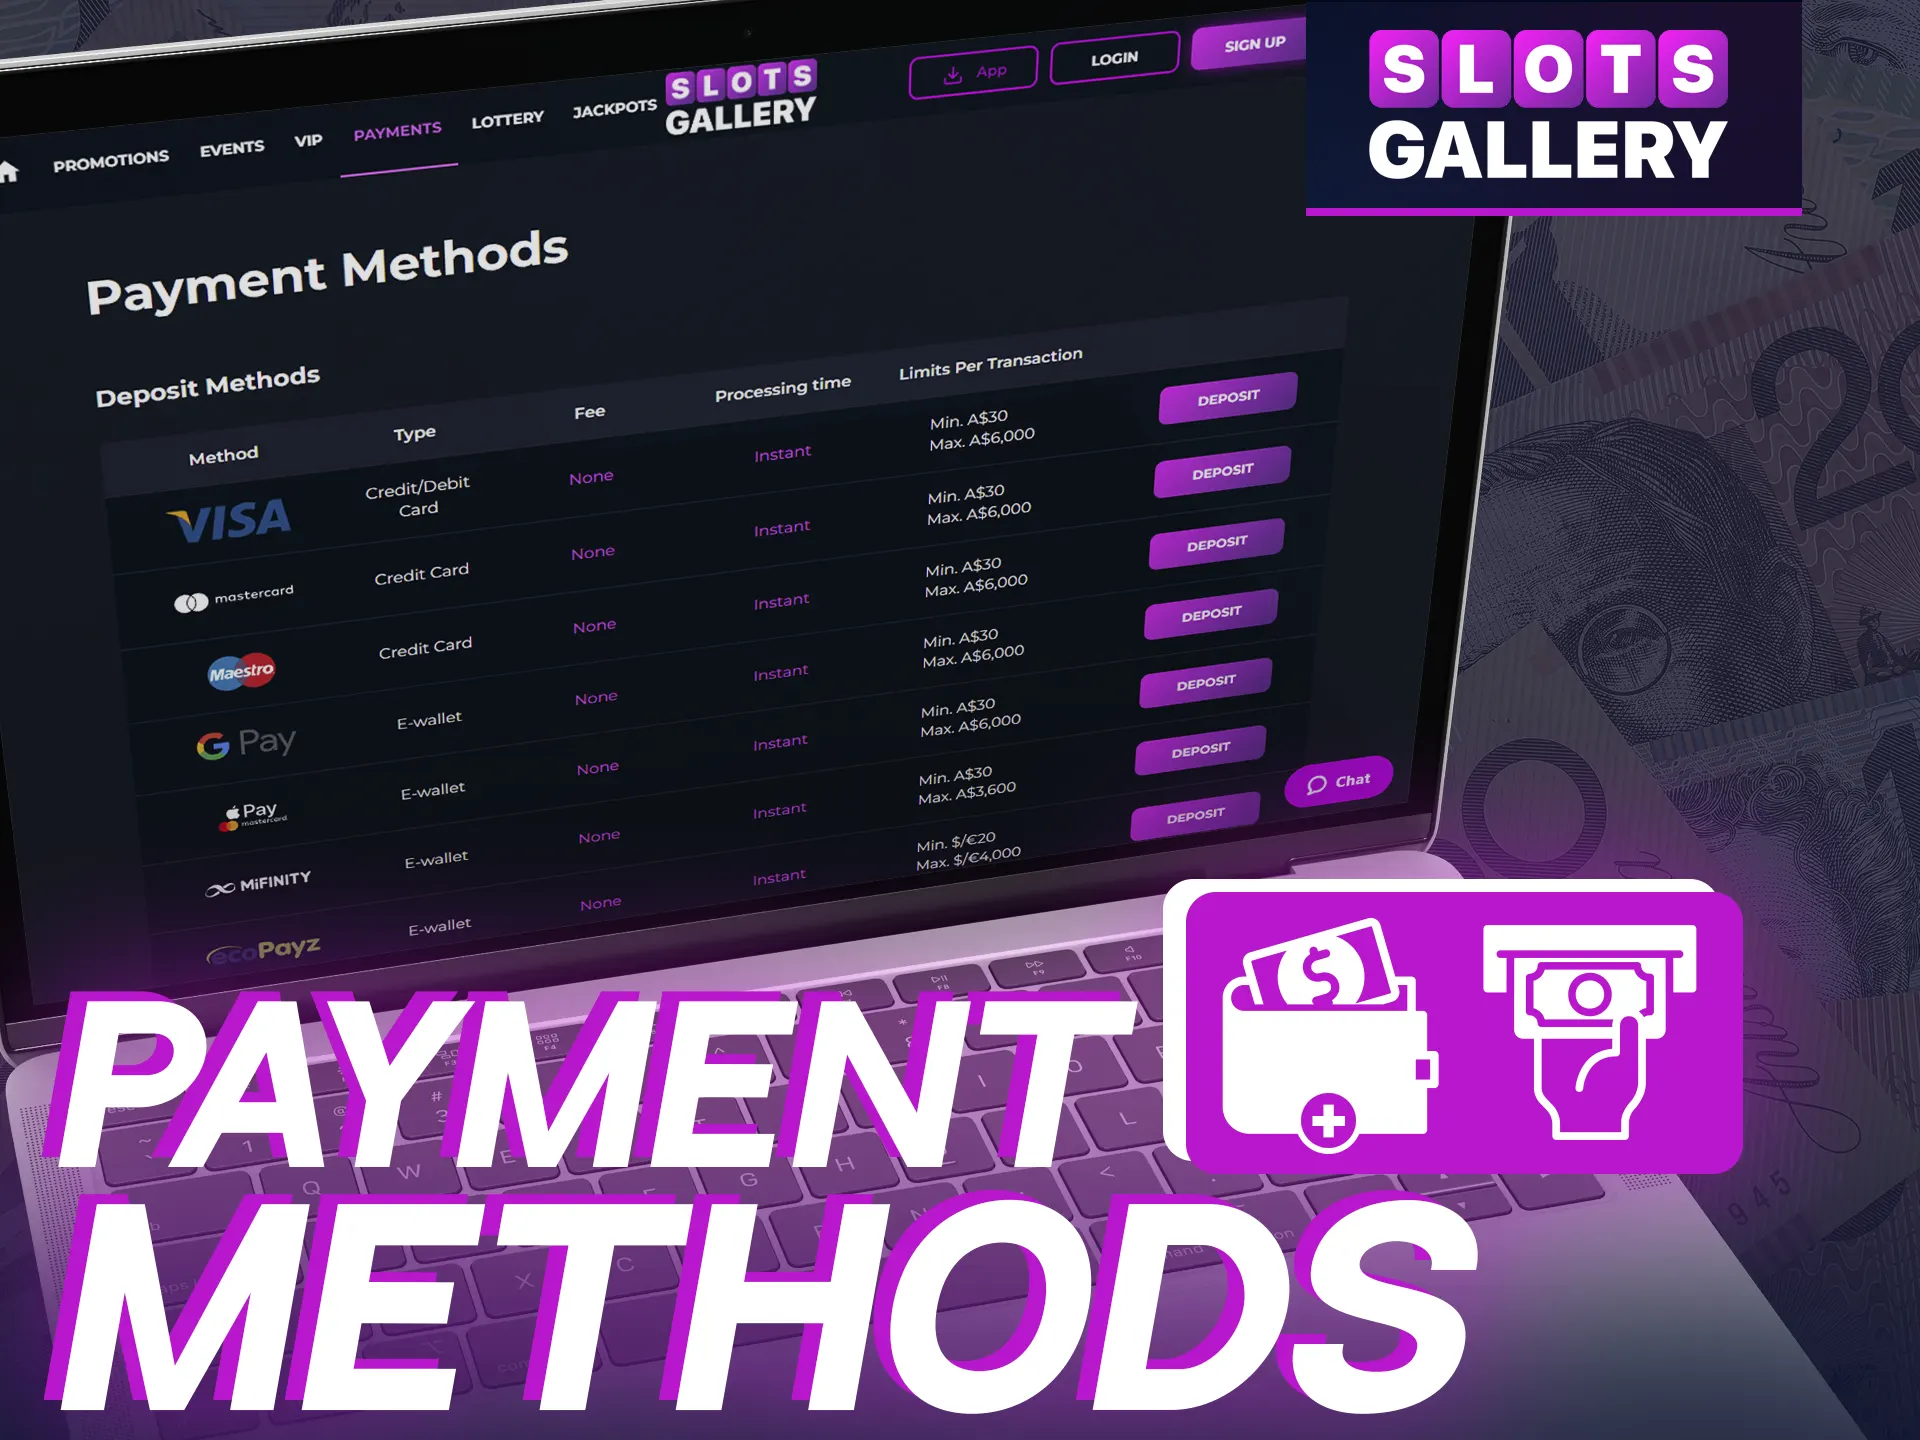 Slots Gallery offers various payment methods for Australians.